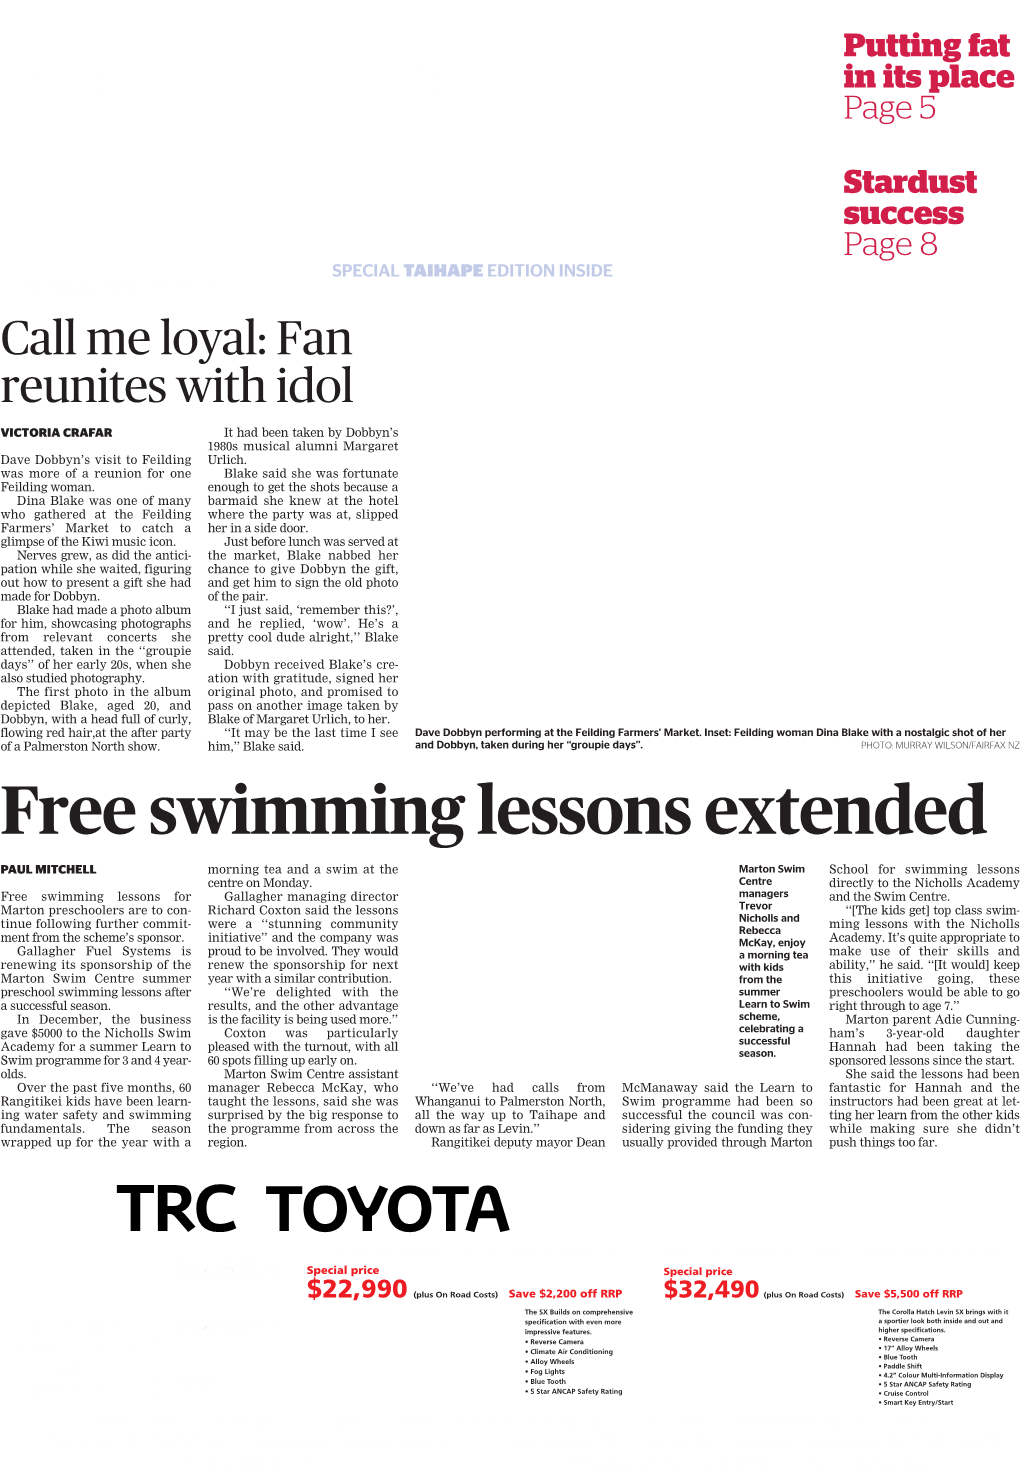 Free Swimming Lessons Extended